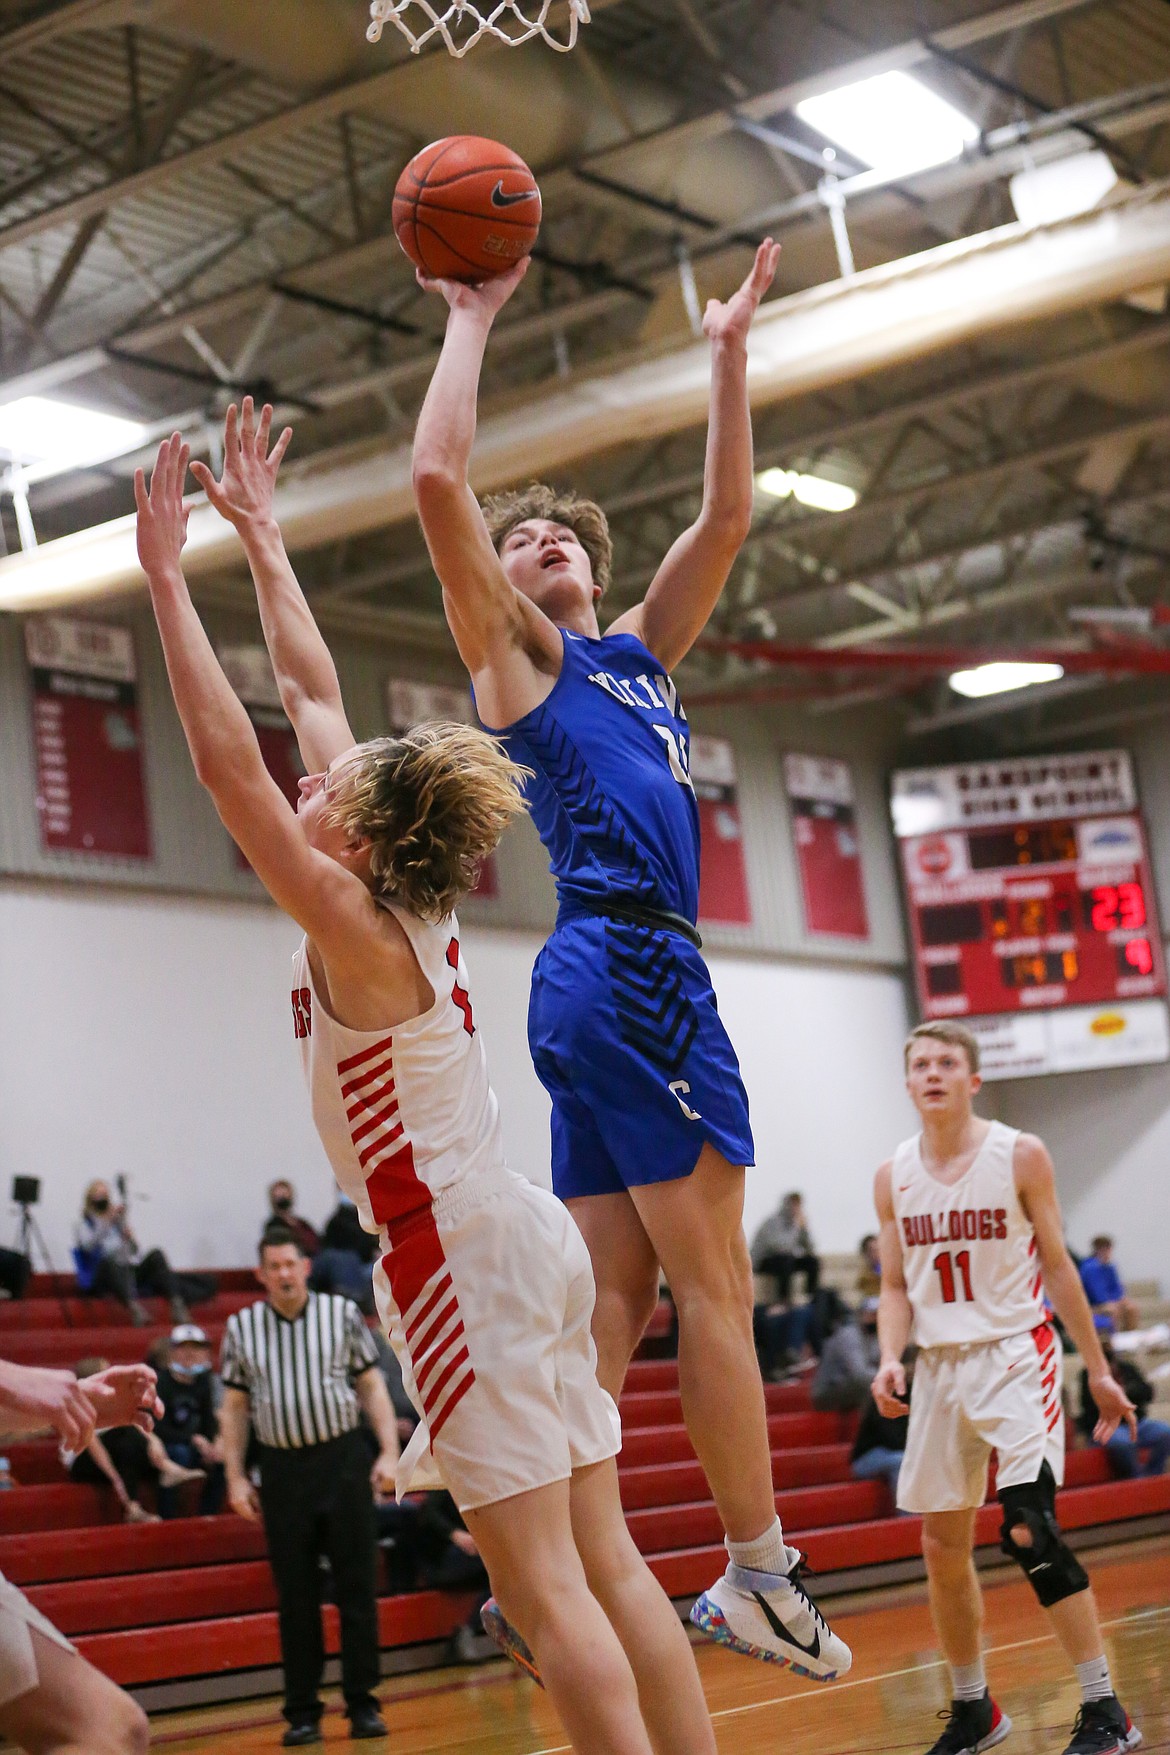 Photo by JASON DUCHOW PHOTOGRAPHY
4A Sandpoint and 5A Coeur d'Alene square off in boys basketball last winter at Sandpoint.